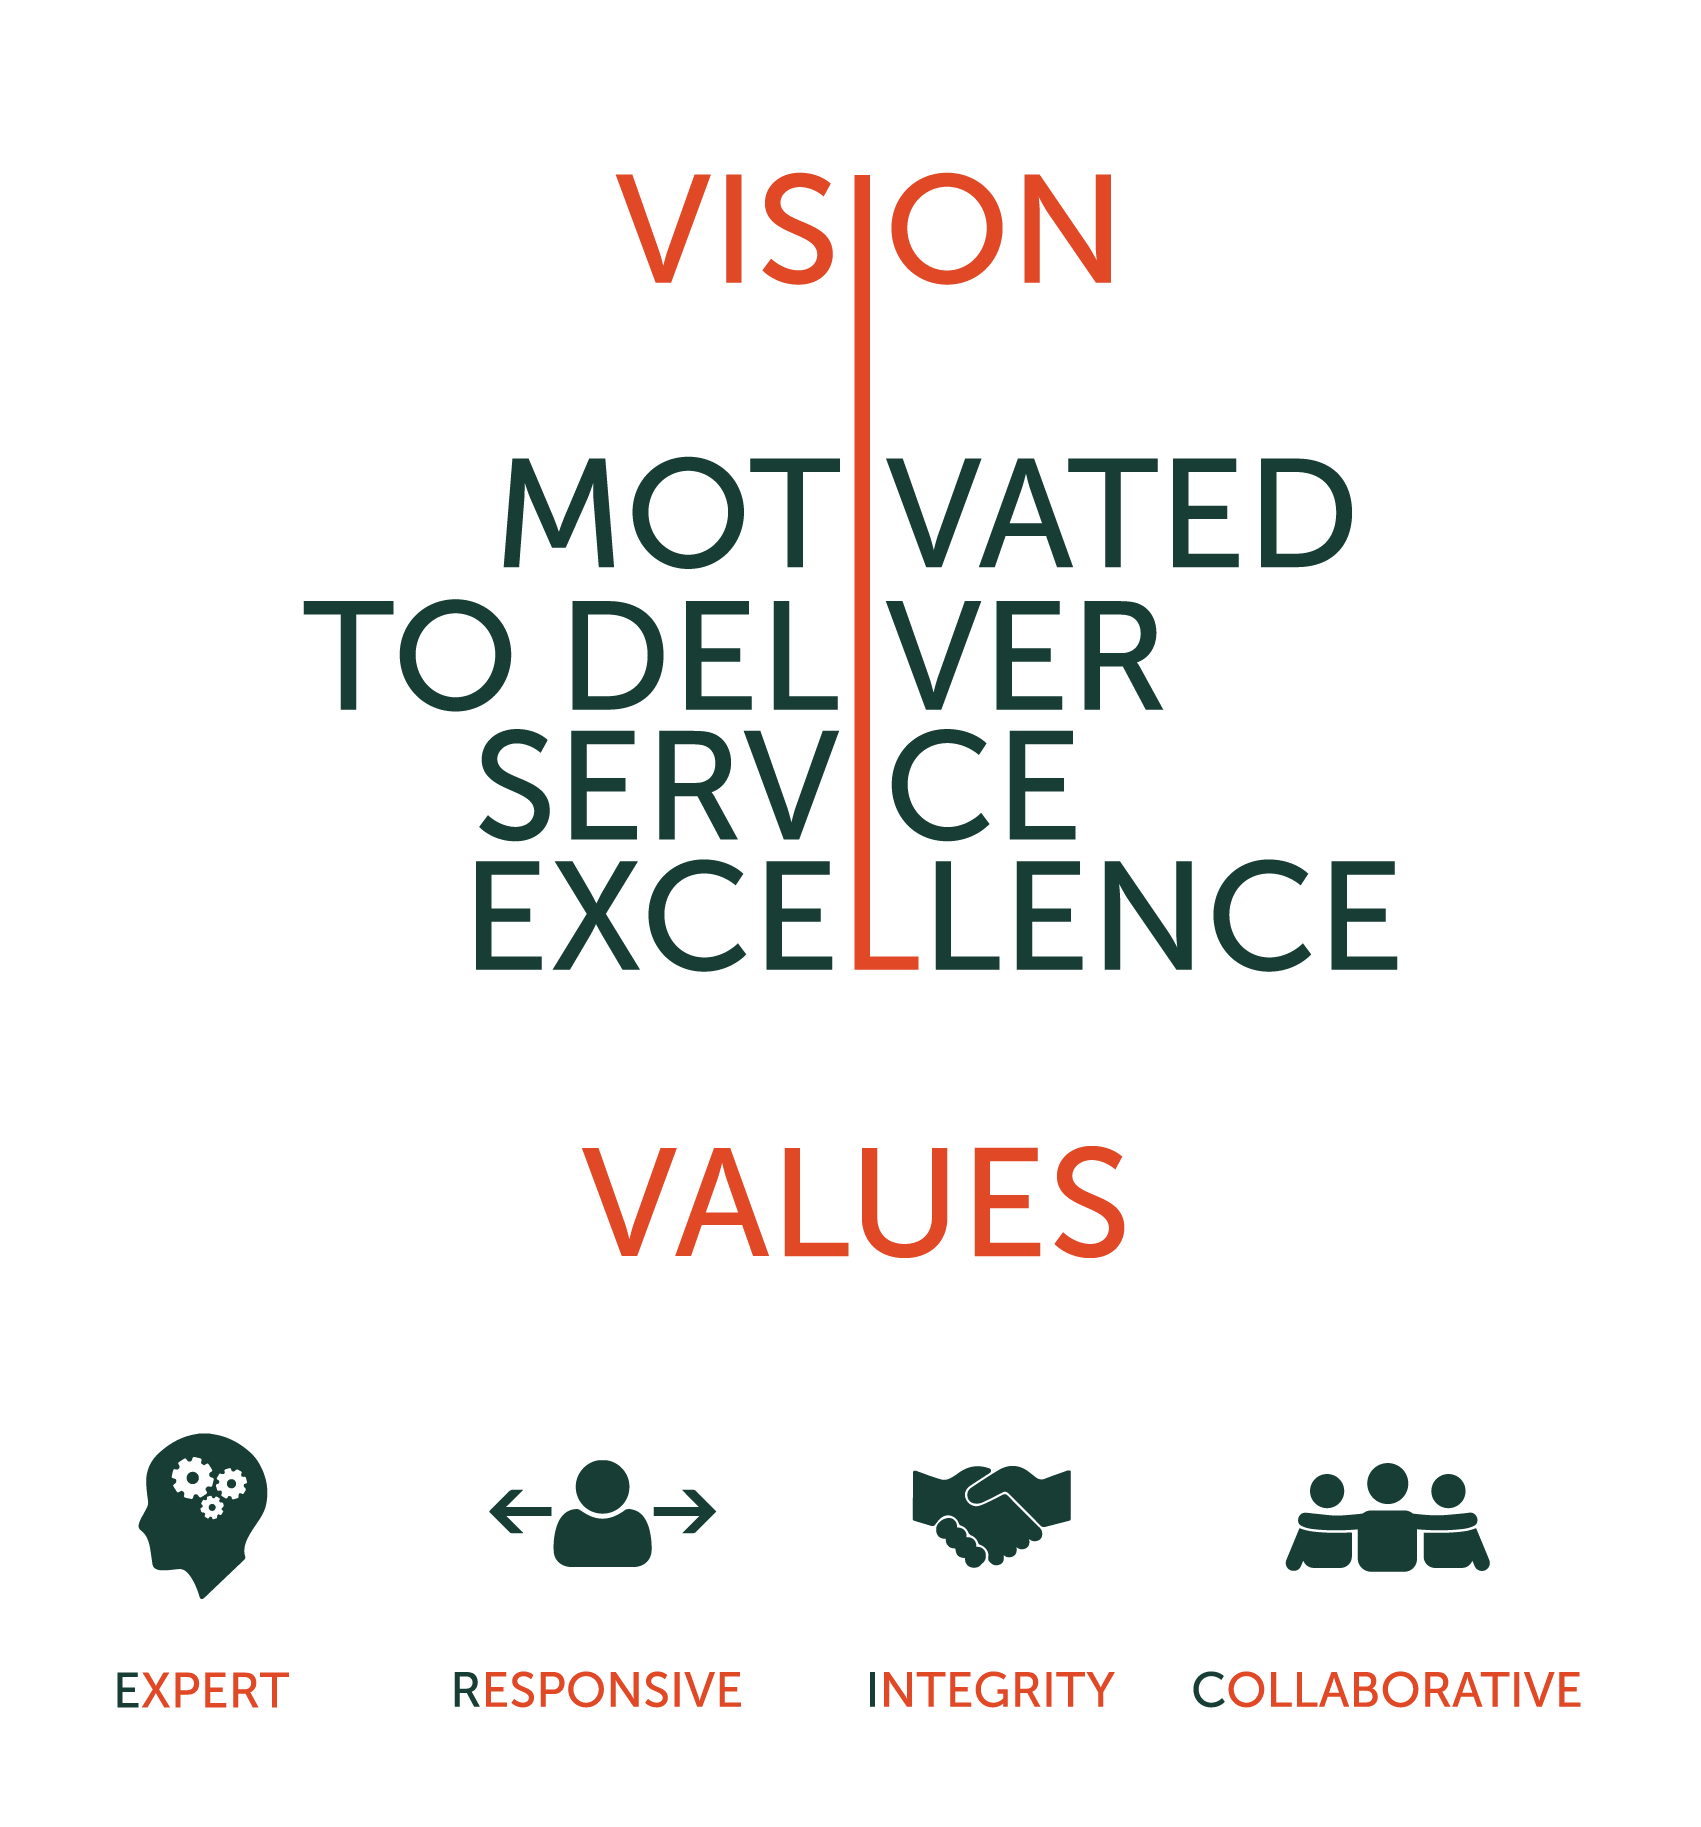 Vision and Values - Motivated to deliver service excellence